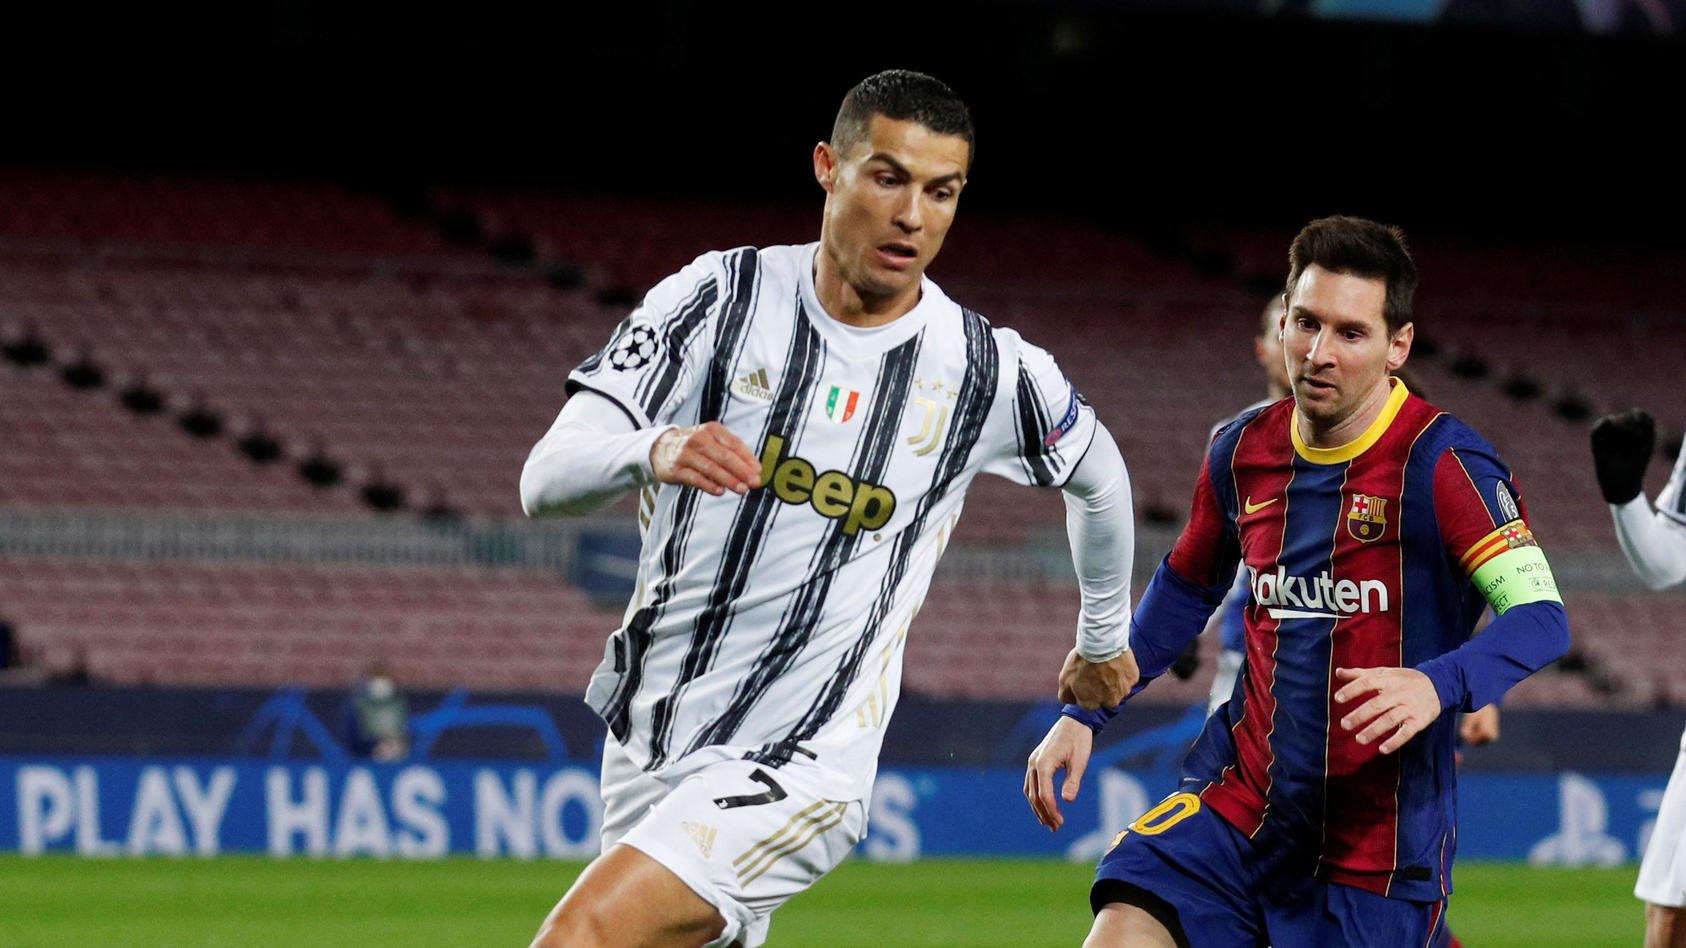 FILE PHOTO: Soccer Football - Champions League - Group G - FC Barcelona v Juventus - Camp Nou, Barcelona, Spain - December 8, 2020 FC Barcelona's Lionel Messi in action with Juventus' Cristiano Ronaldo REUTERS/Albert Gea/File Photo